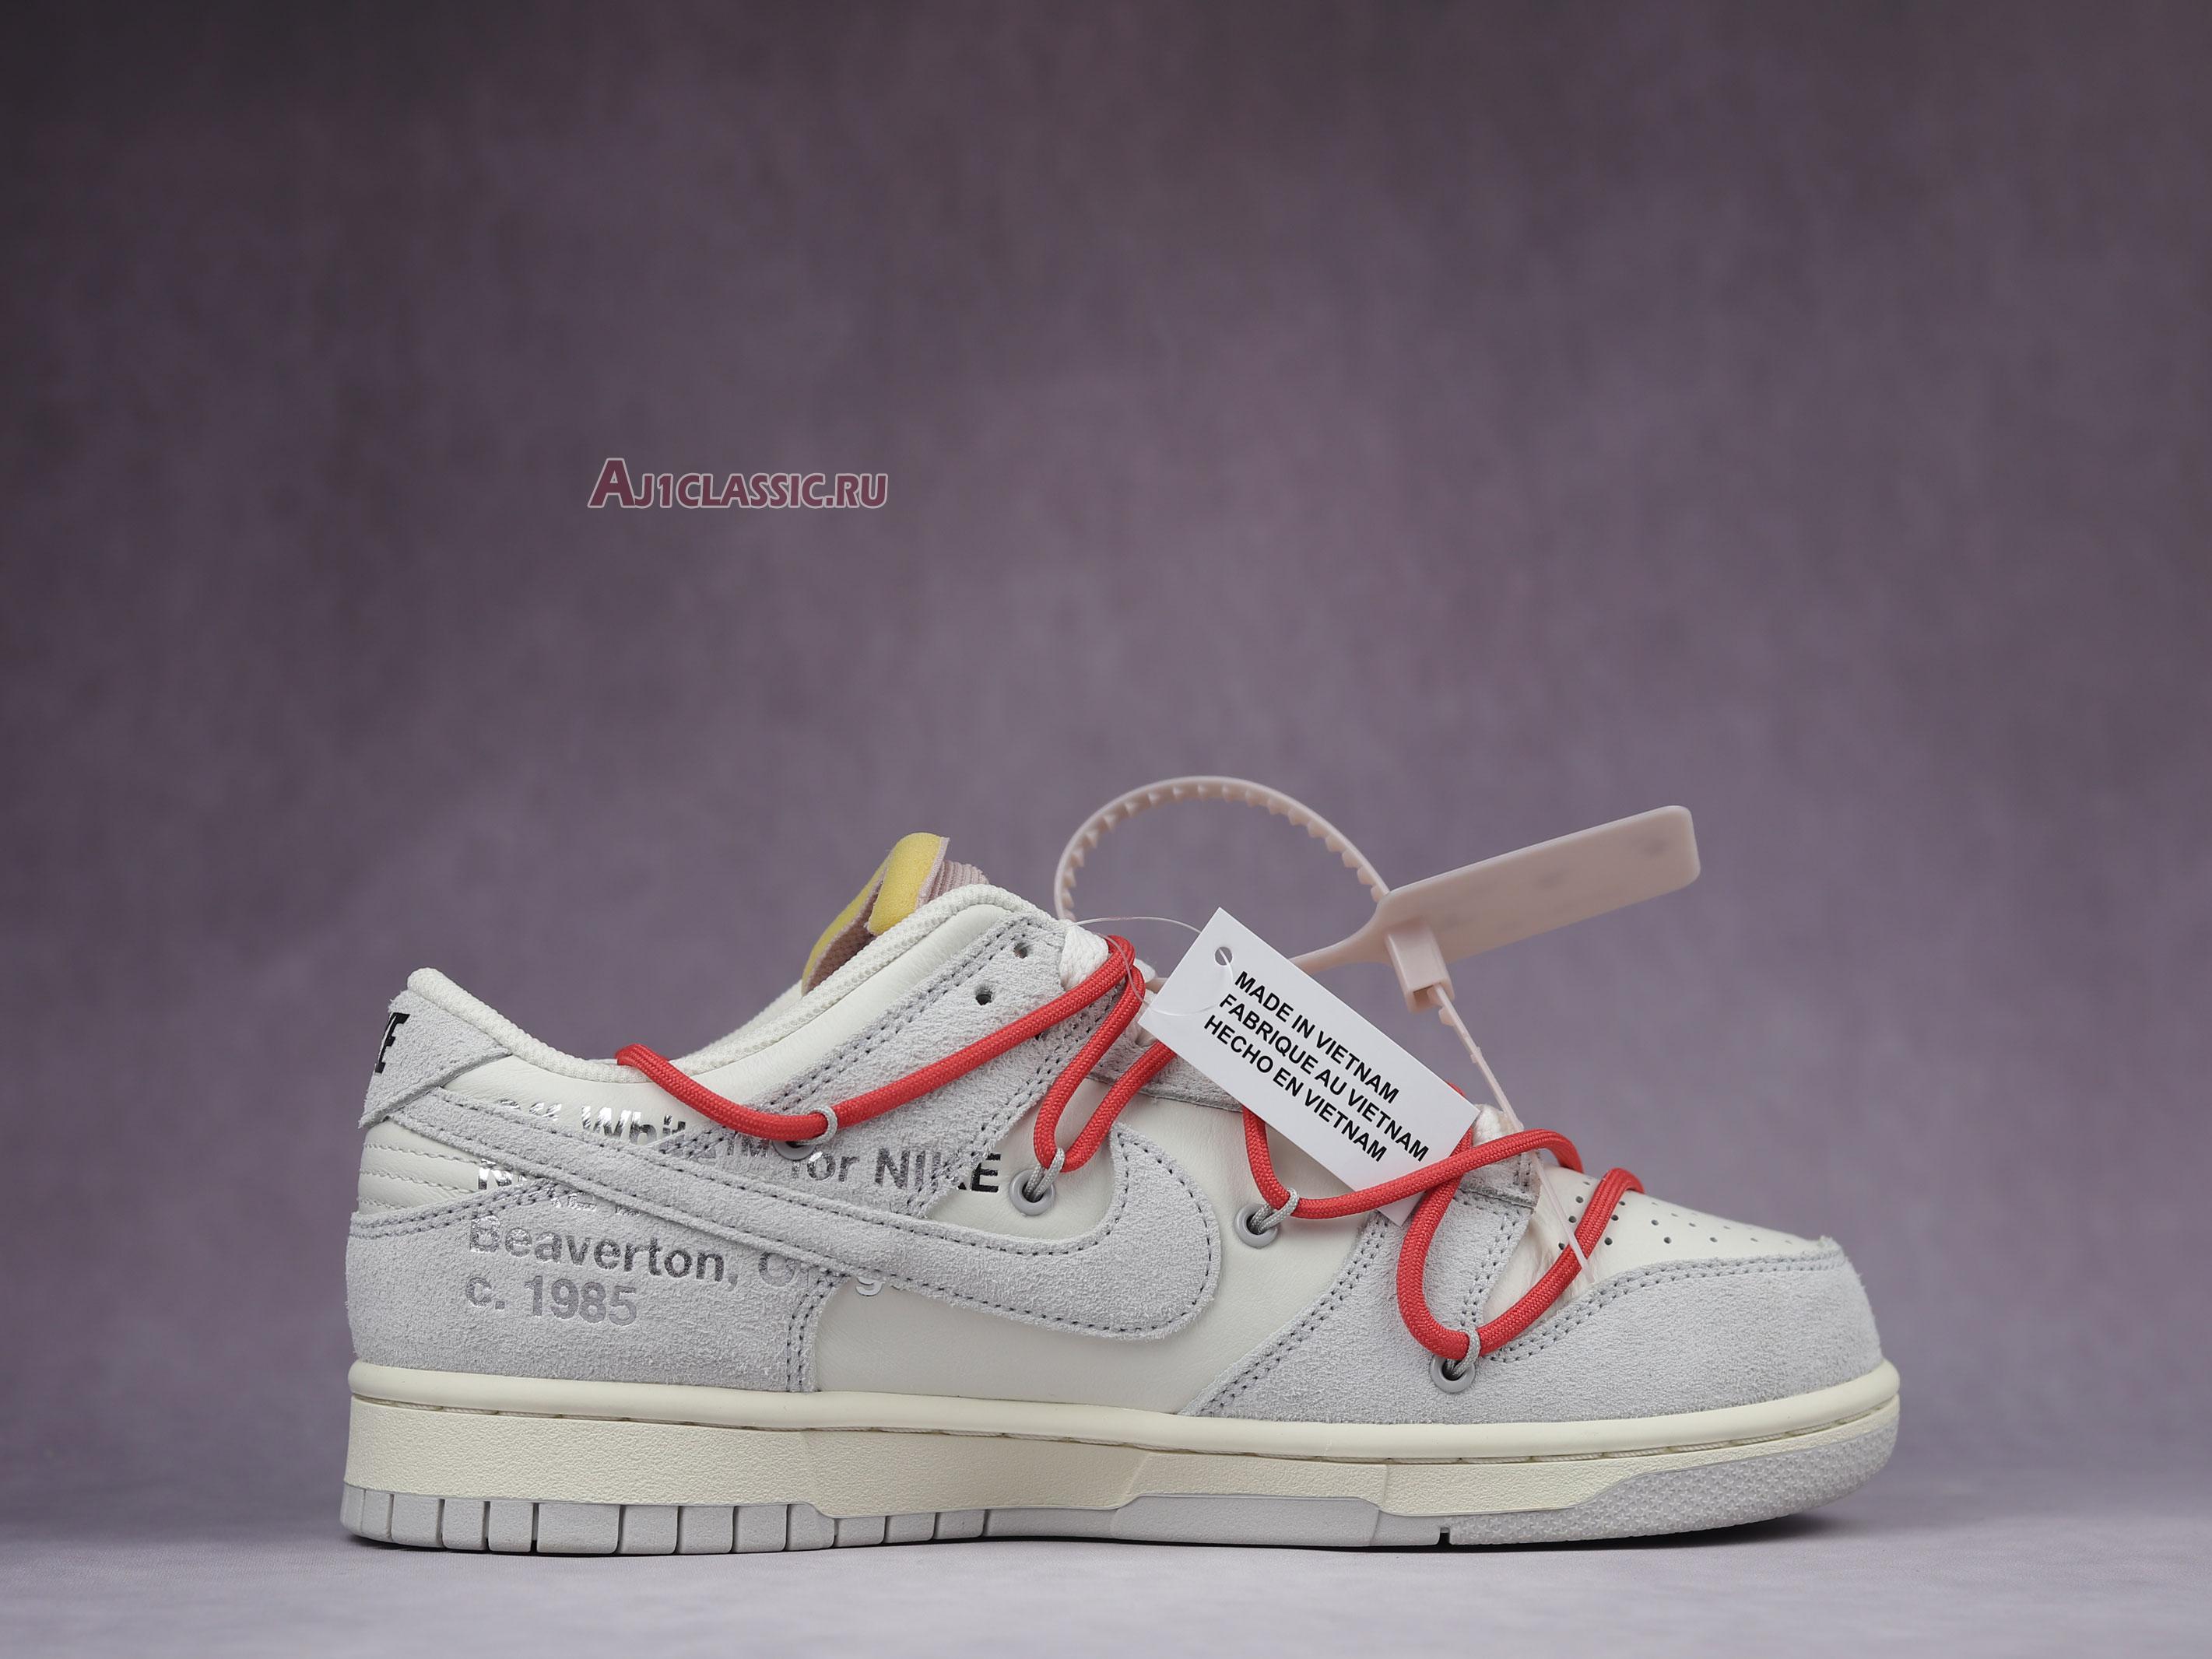 Off-White x Nike Dunk Low "Lot 33 of 50" DJ0950-118